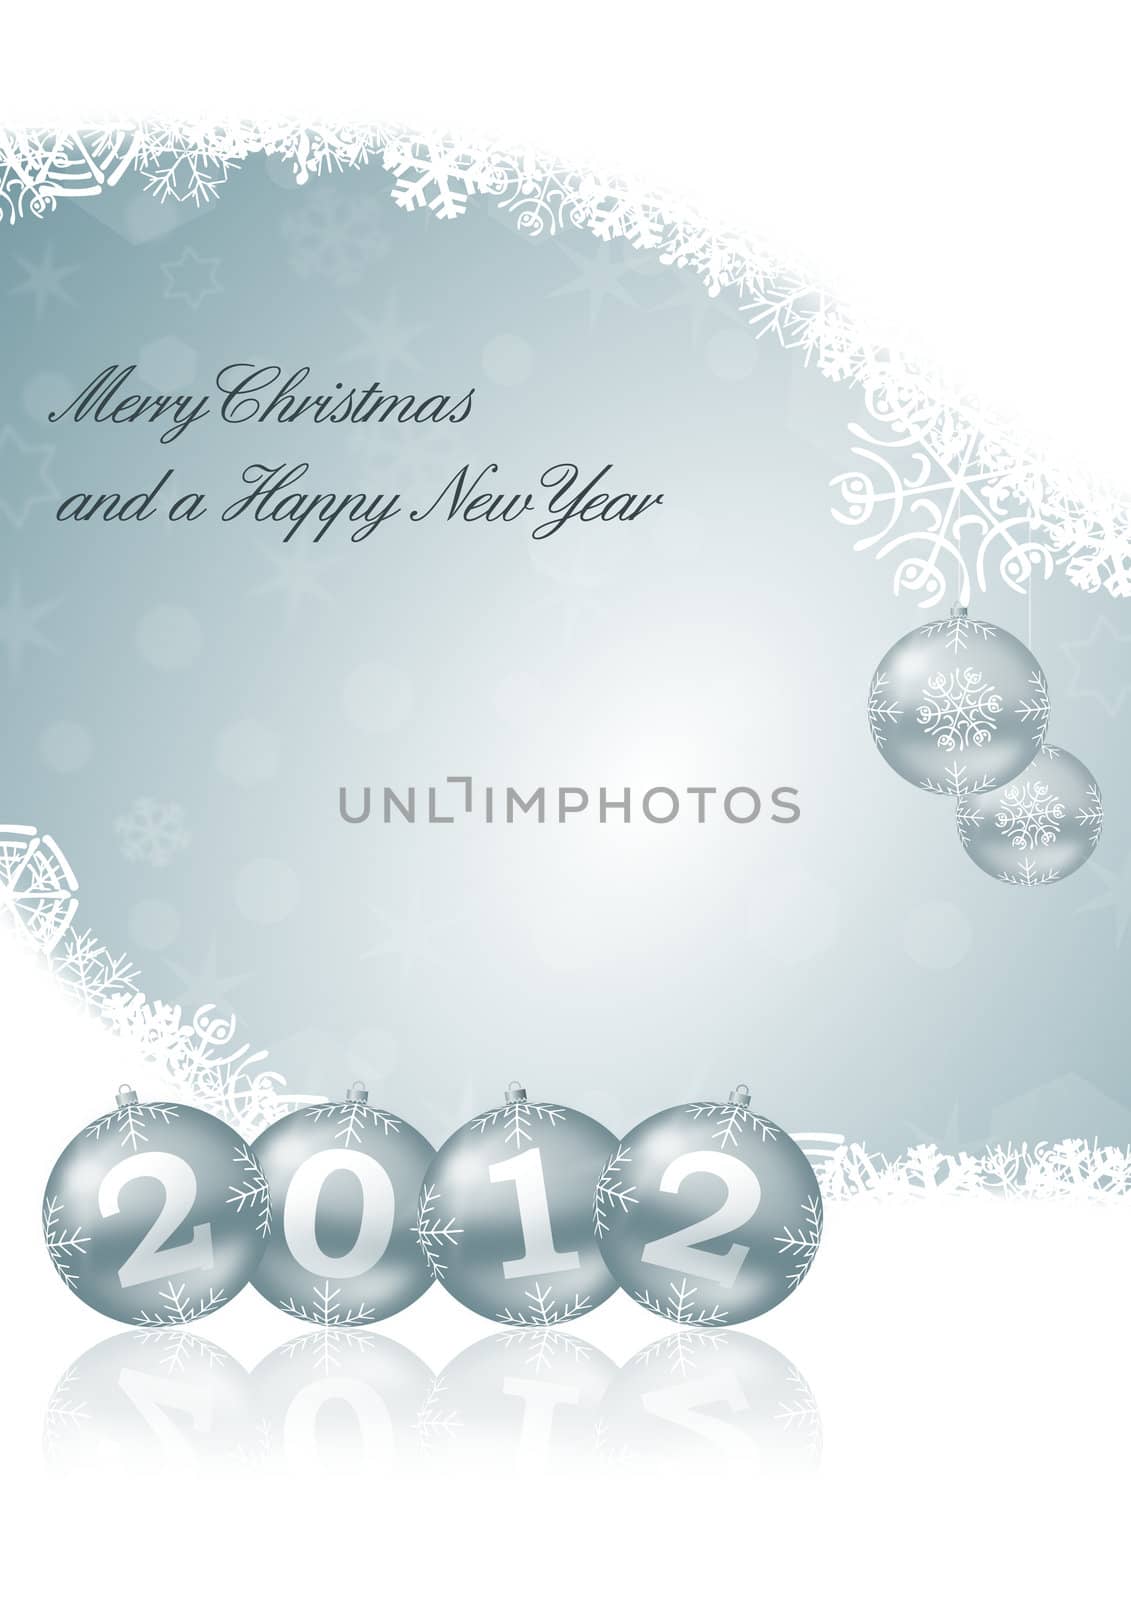 Merry Christmas and a Happy New Year illustration with snowflakes and christmas balls